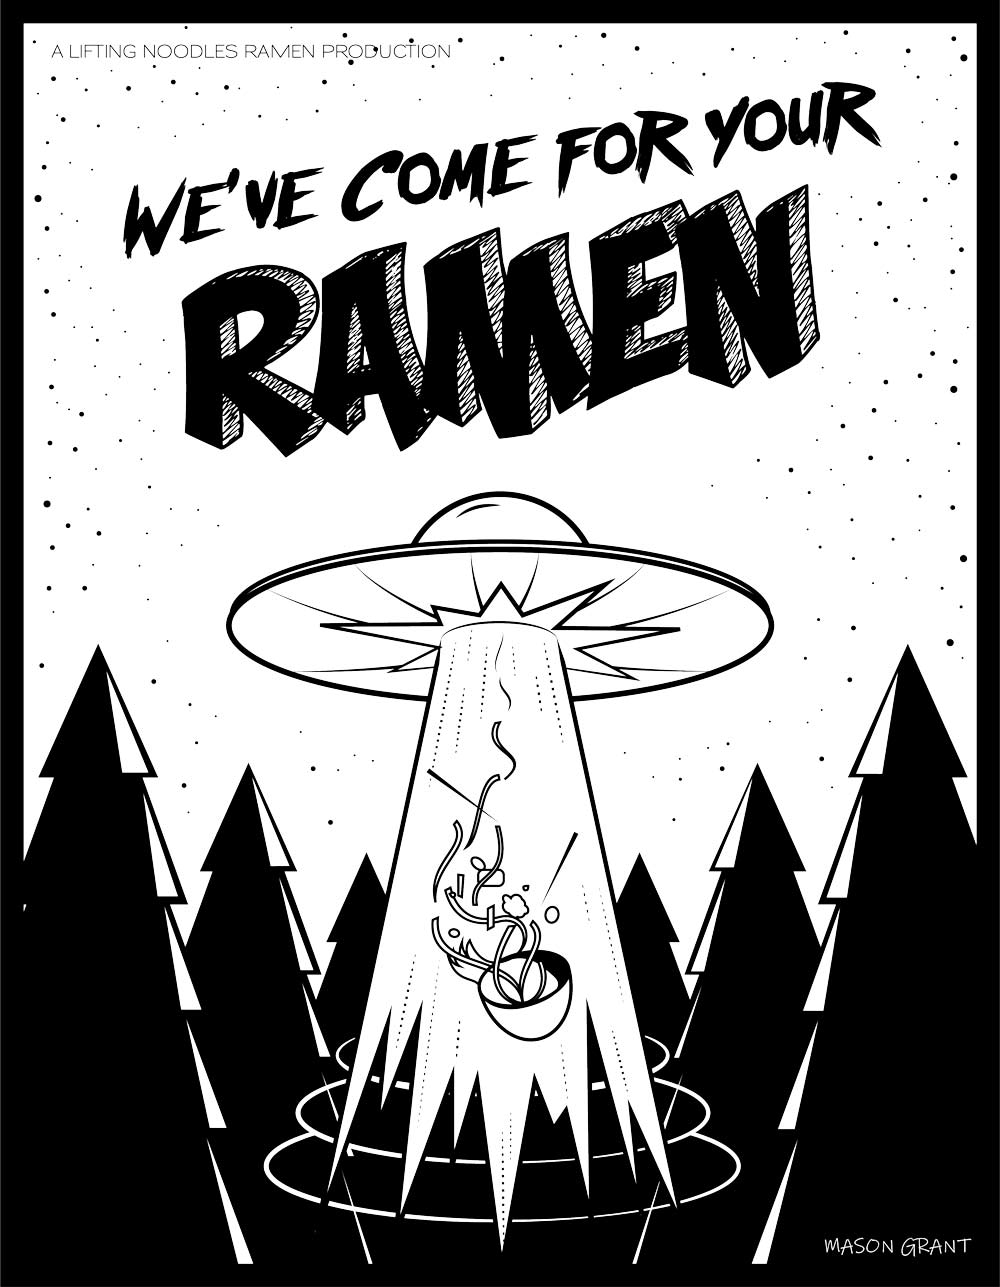 We've Come for your RAMEN